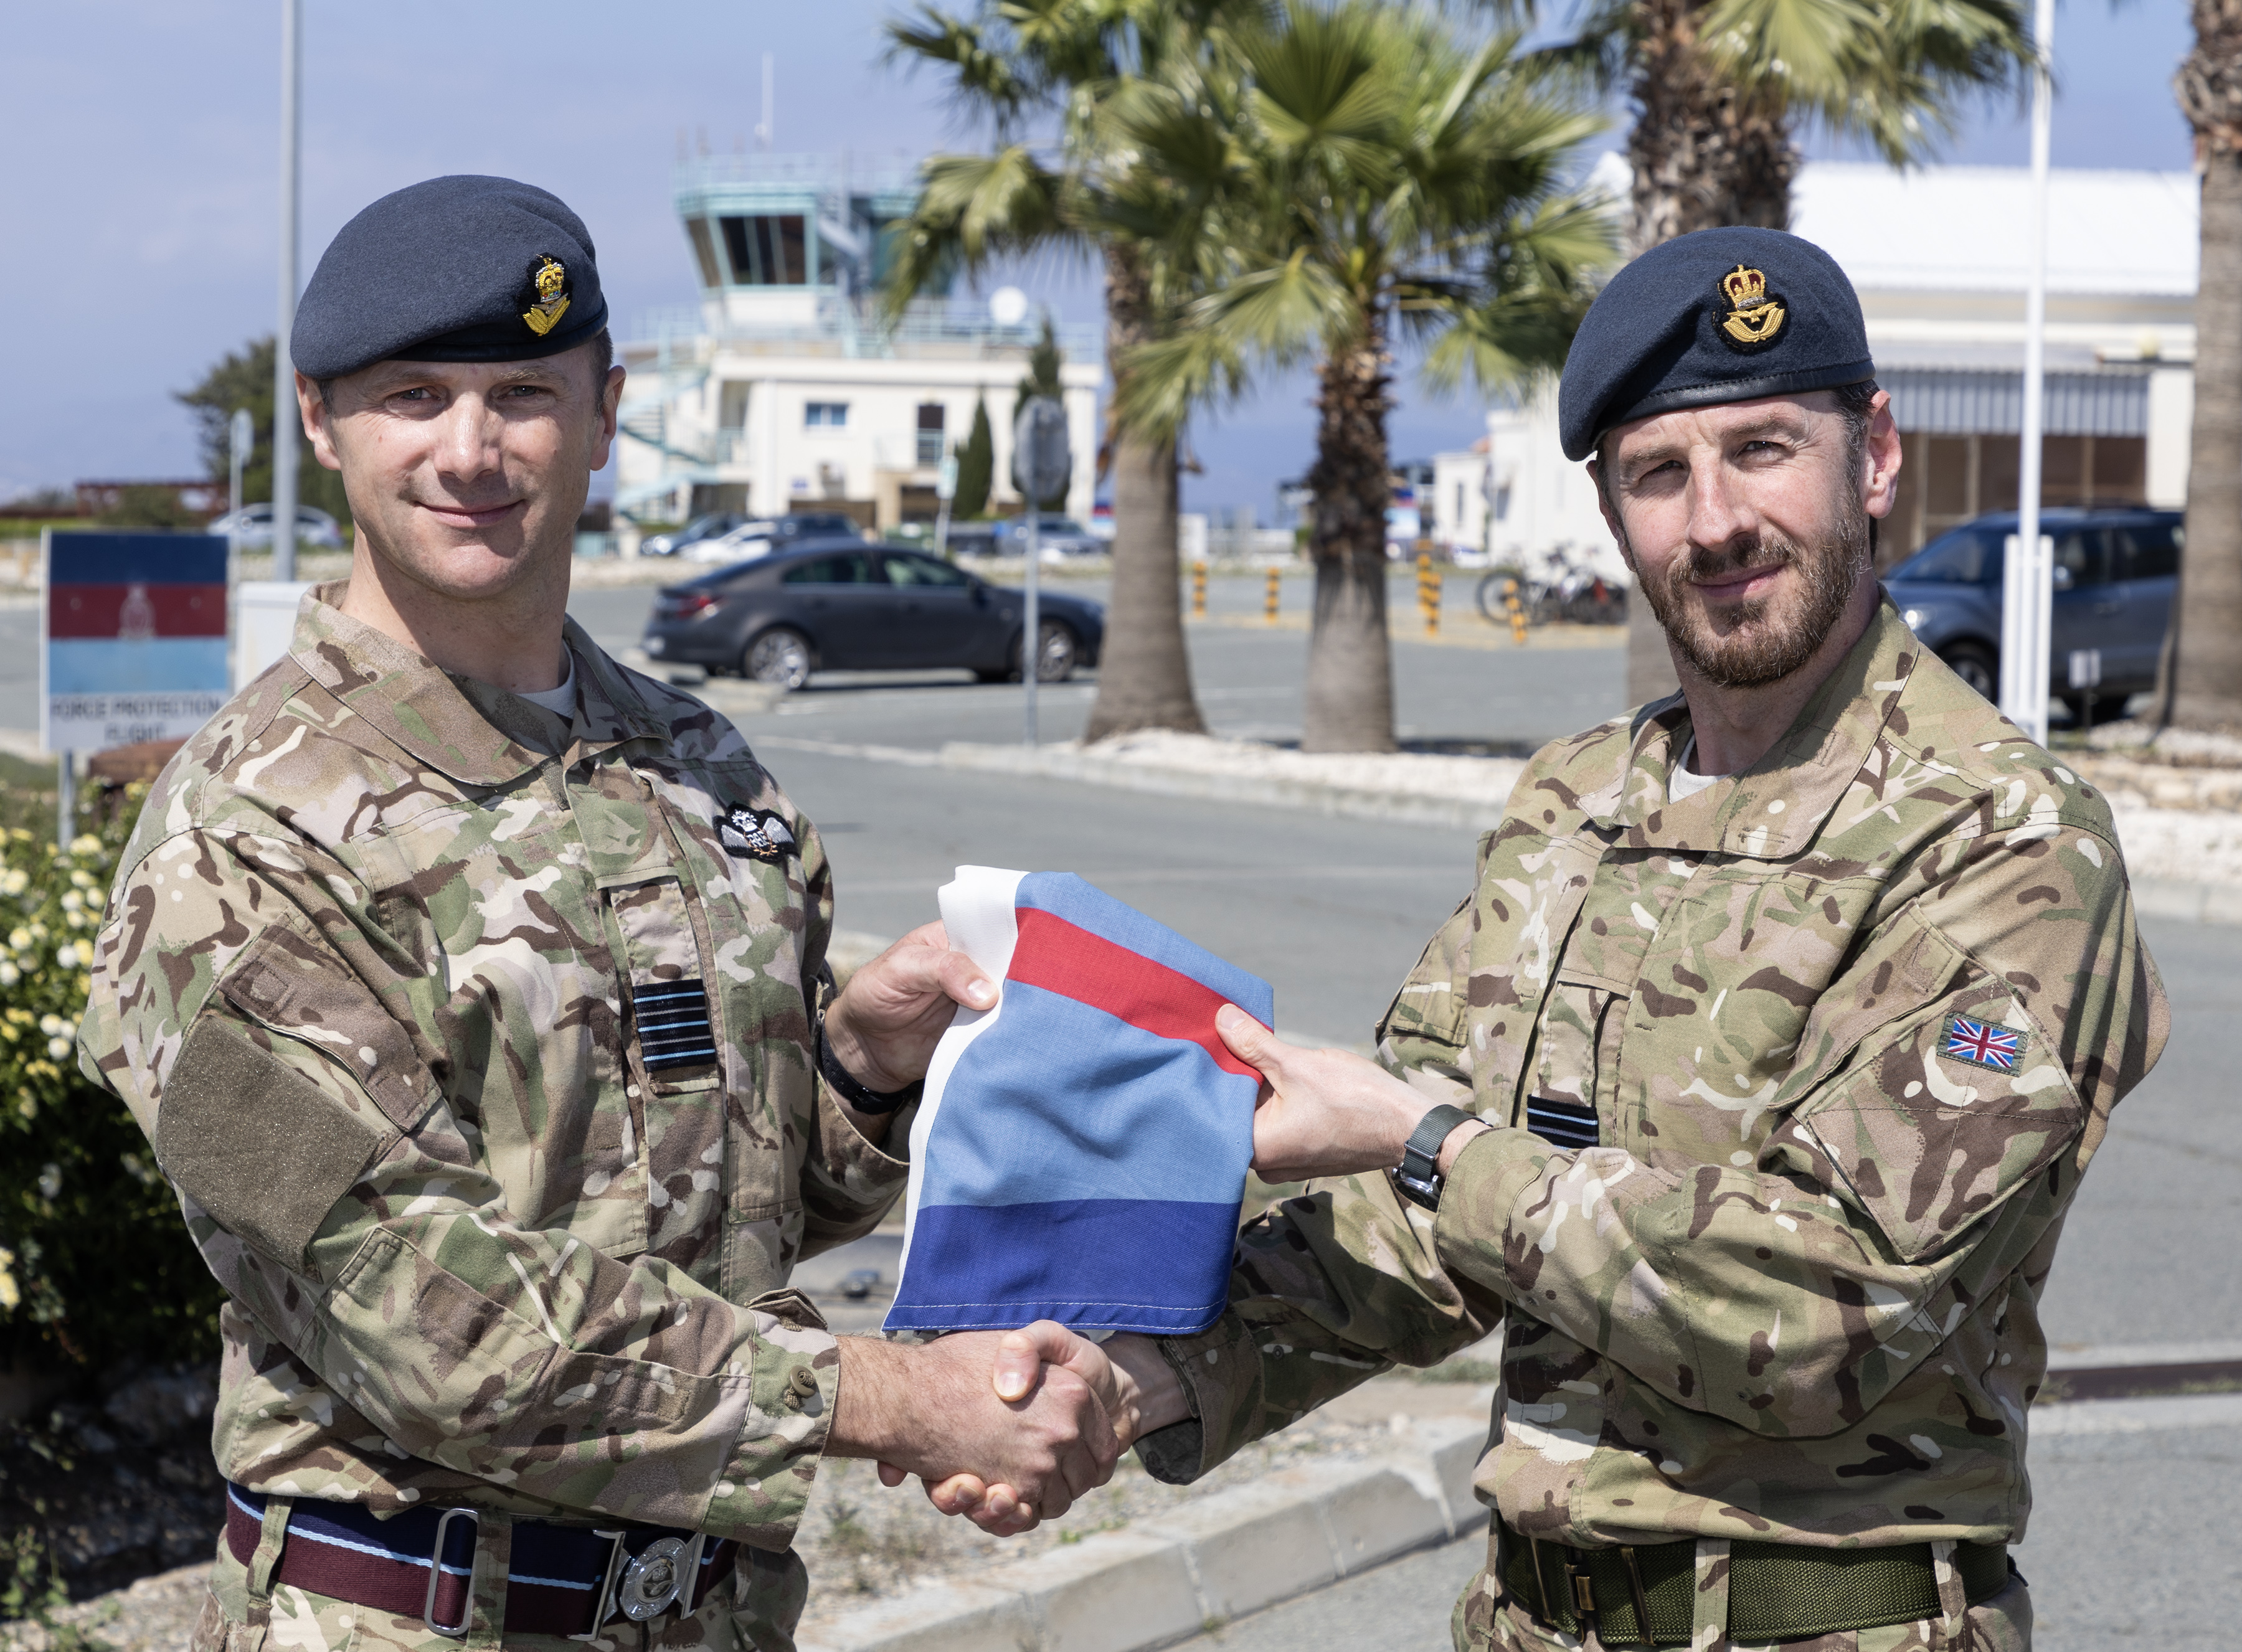 Image shows RAF personnel shaking hands while holding a flag. 